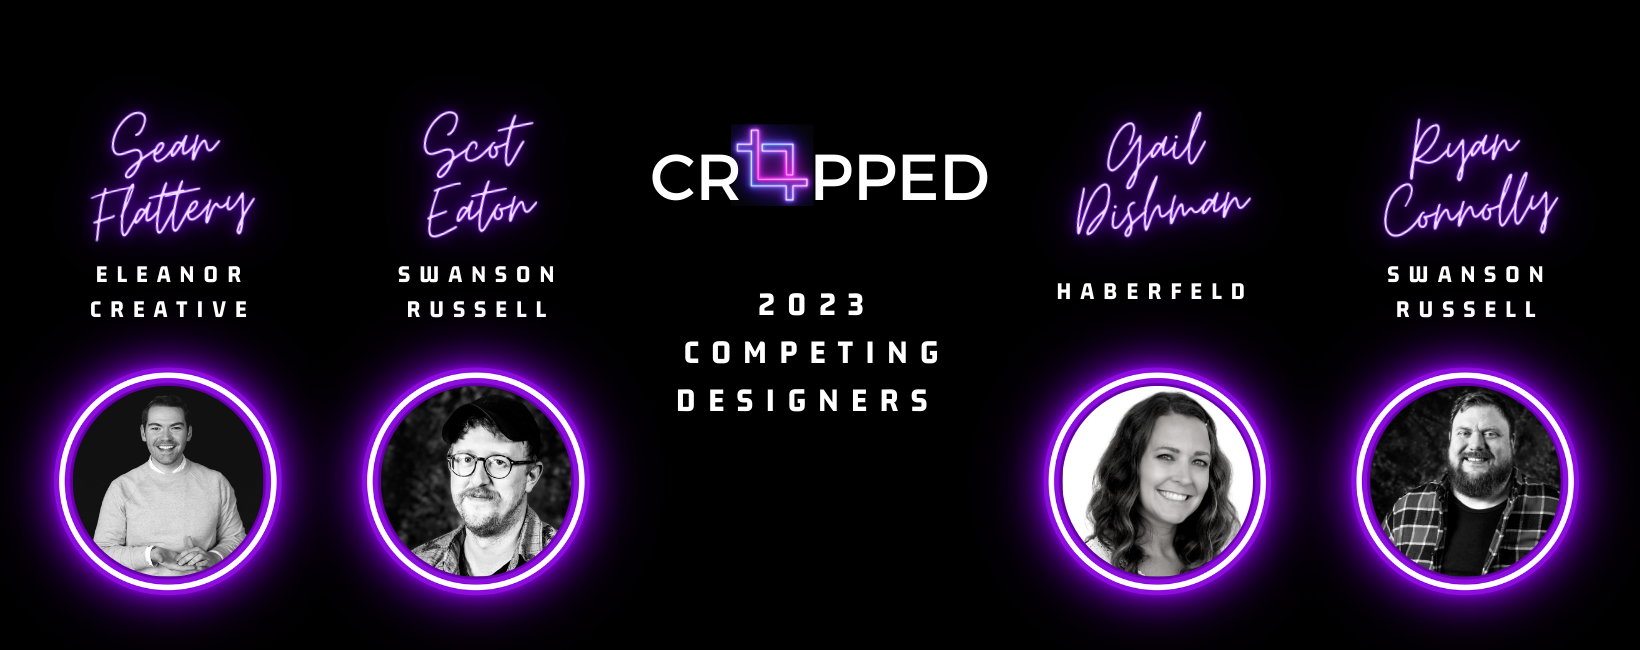 2022 Cropped Designers